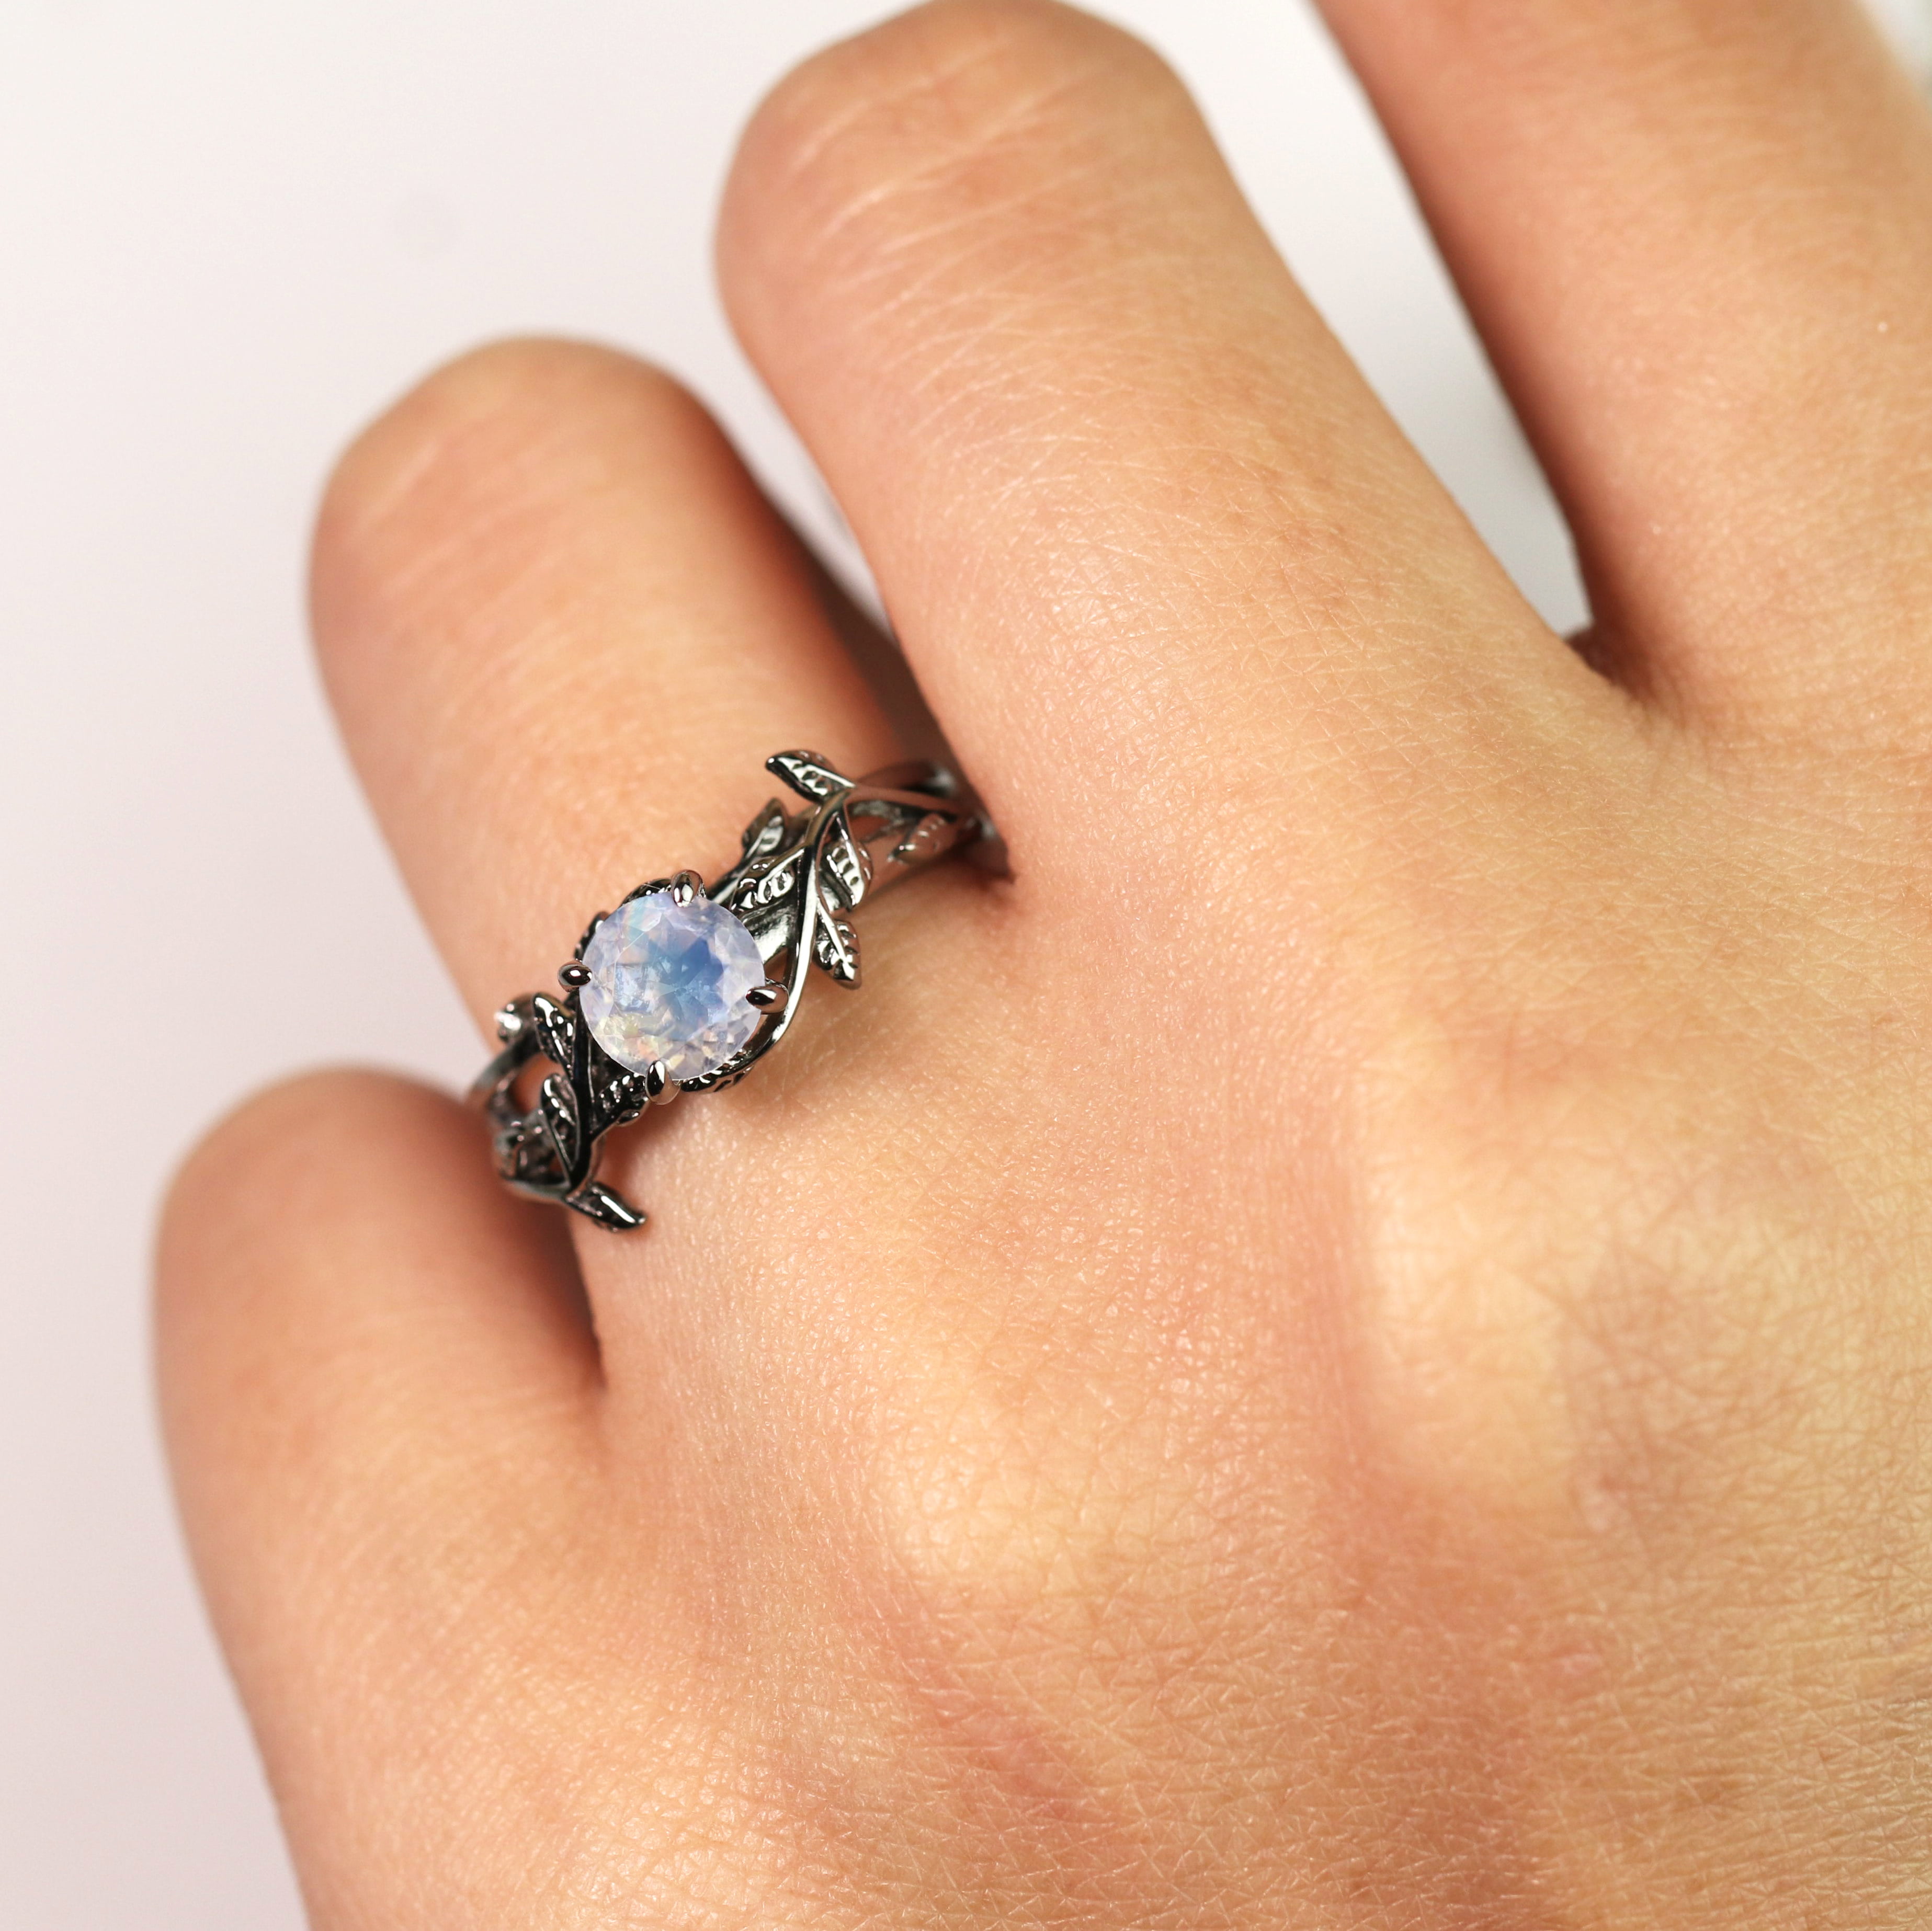 Silver and gold black moonstone ring - Alice Robson Jewellery